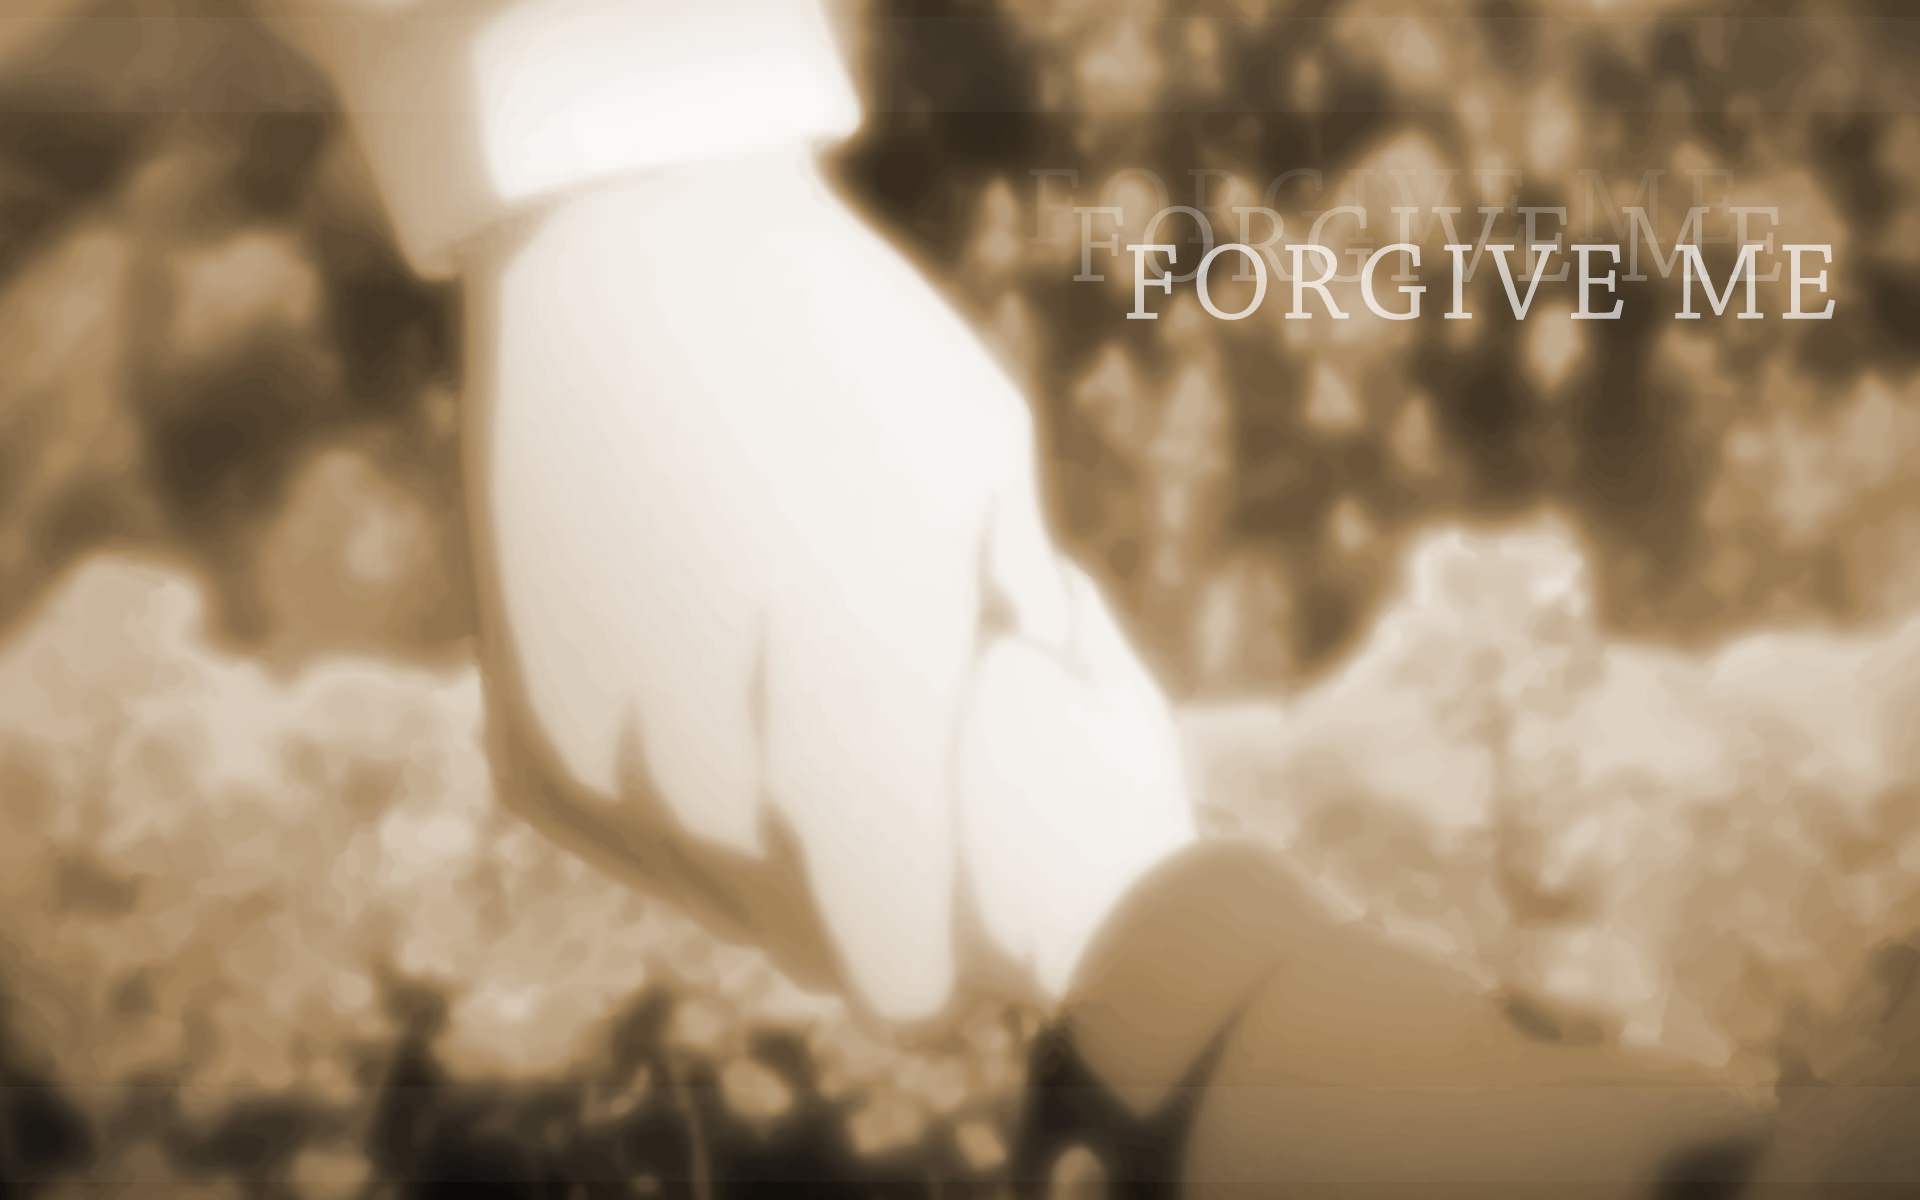 Clannad TV [Nardoum] Forgive Me - Clannad After Story Wall